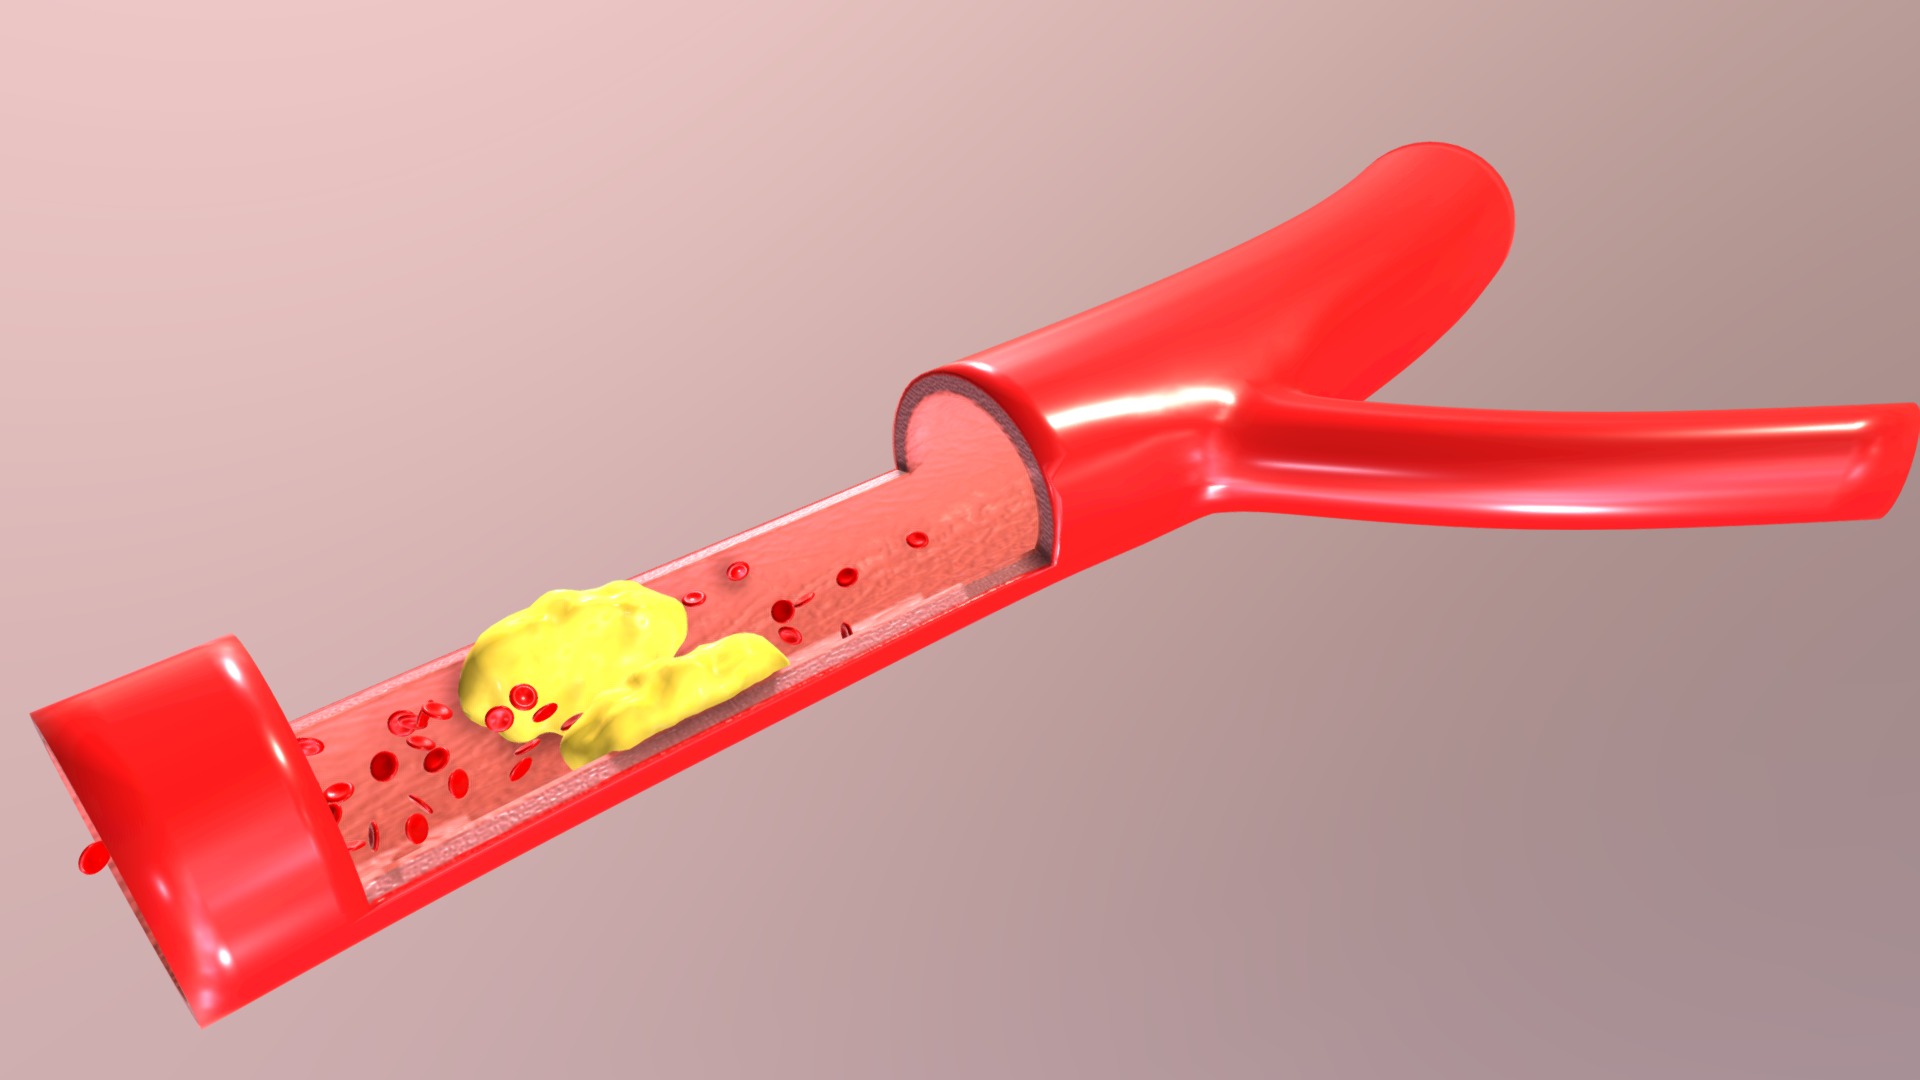 3D model Artery Blockage Detail (animated) - This is a 3D model of the Artery Blockage Detail (animated). The 3D model is about a red plastic toy.